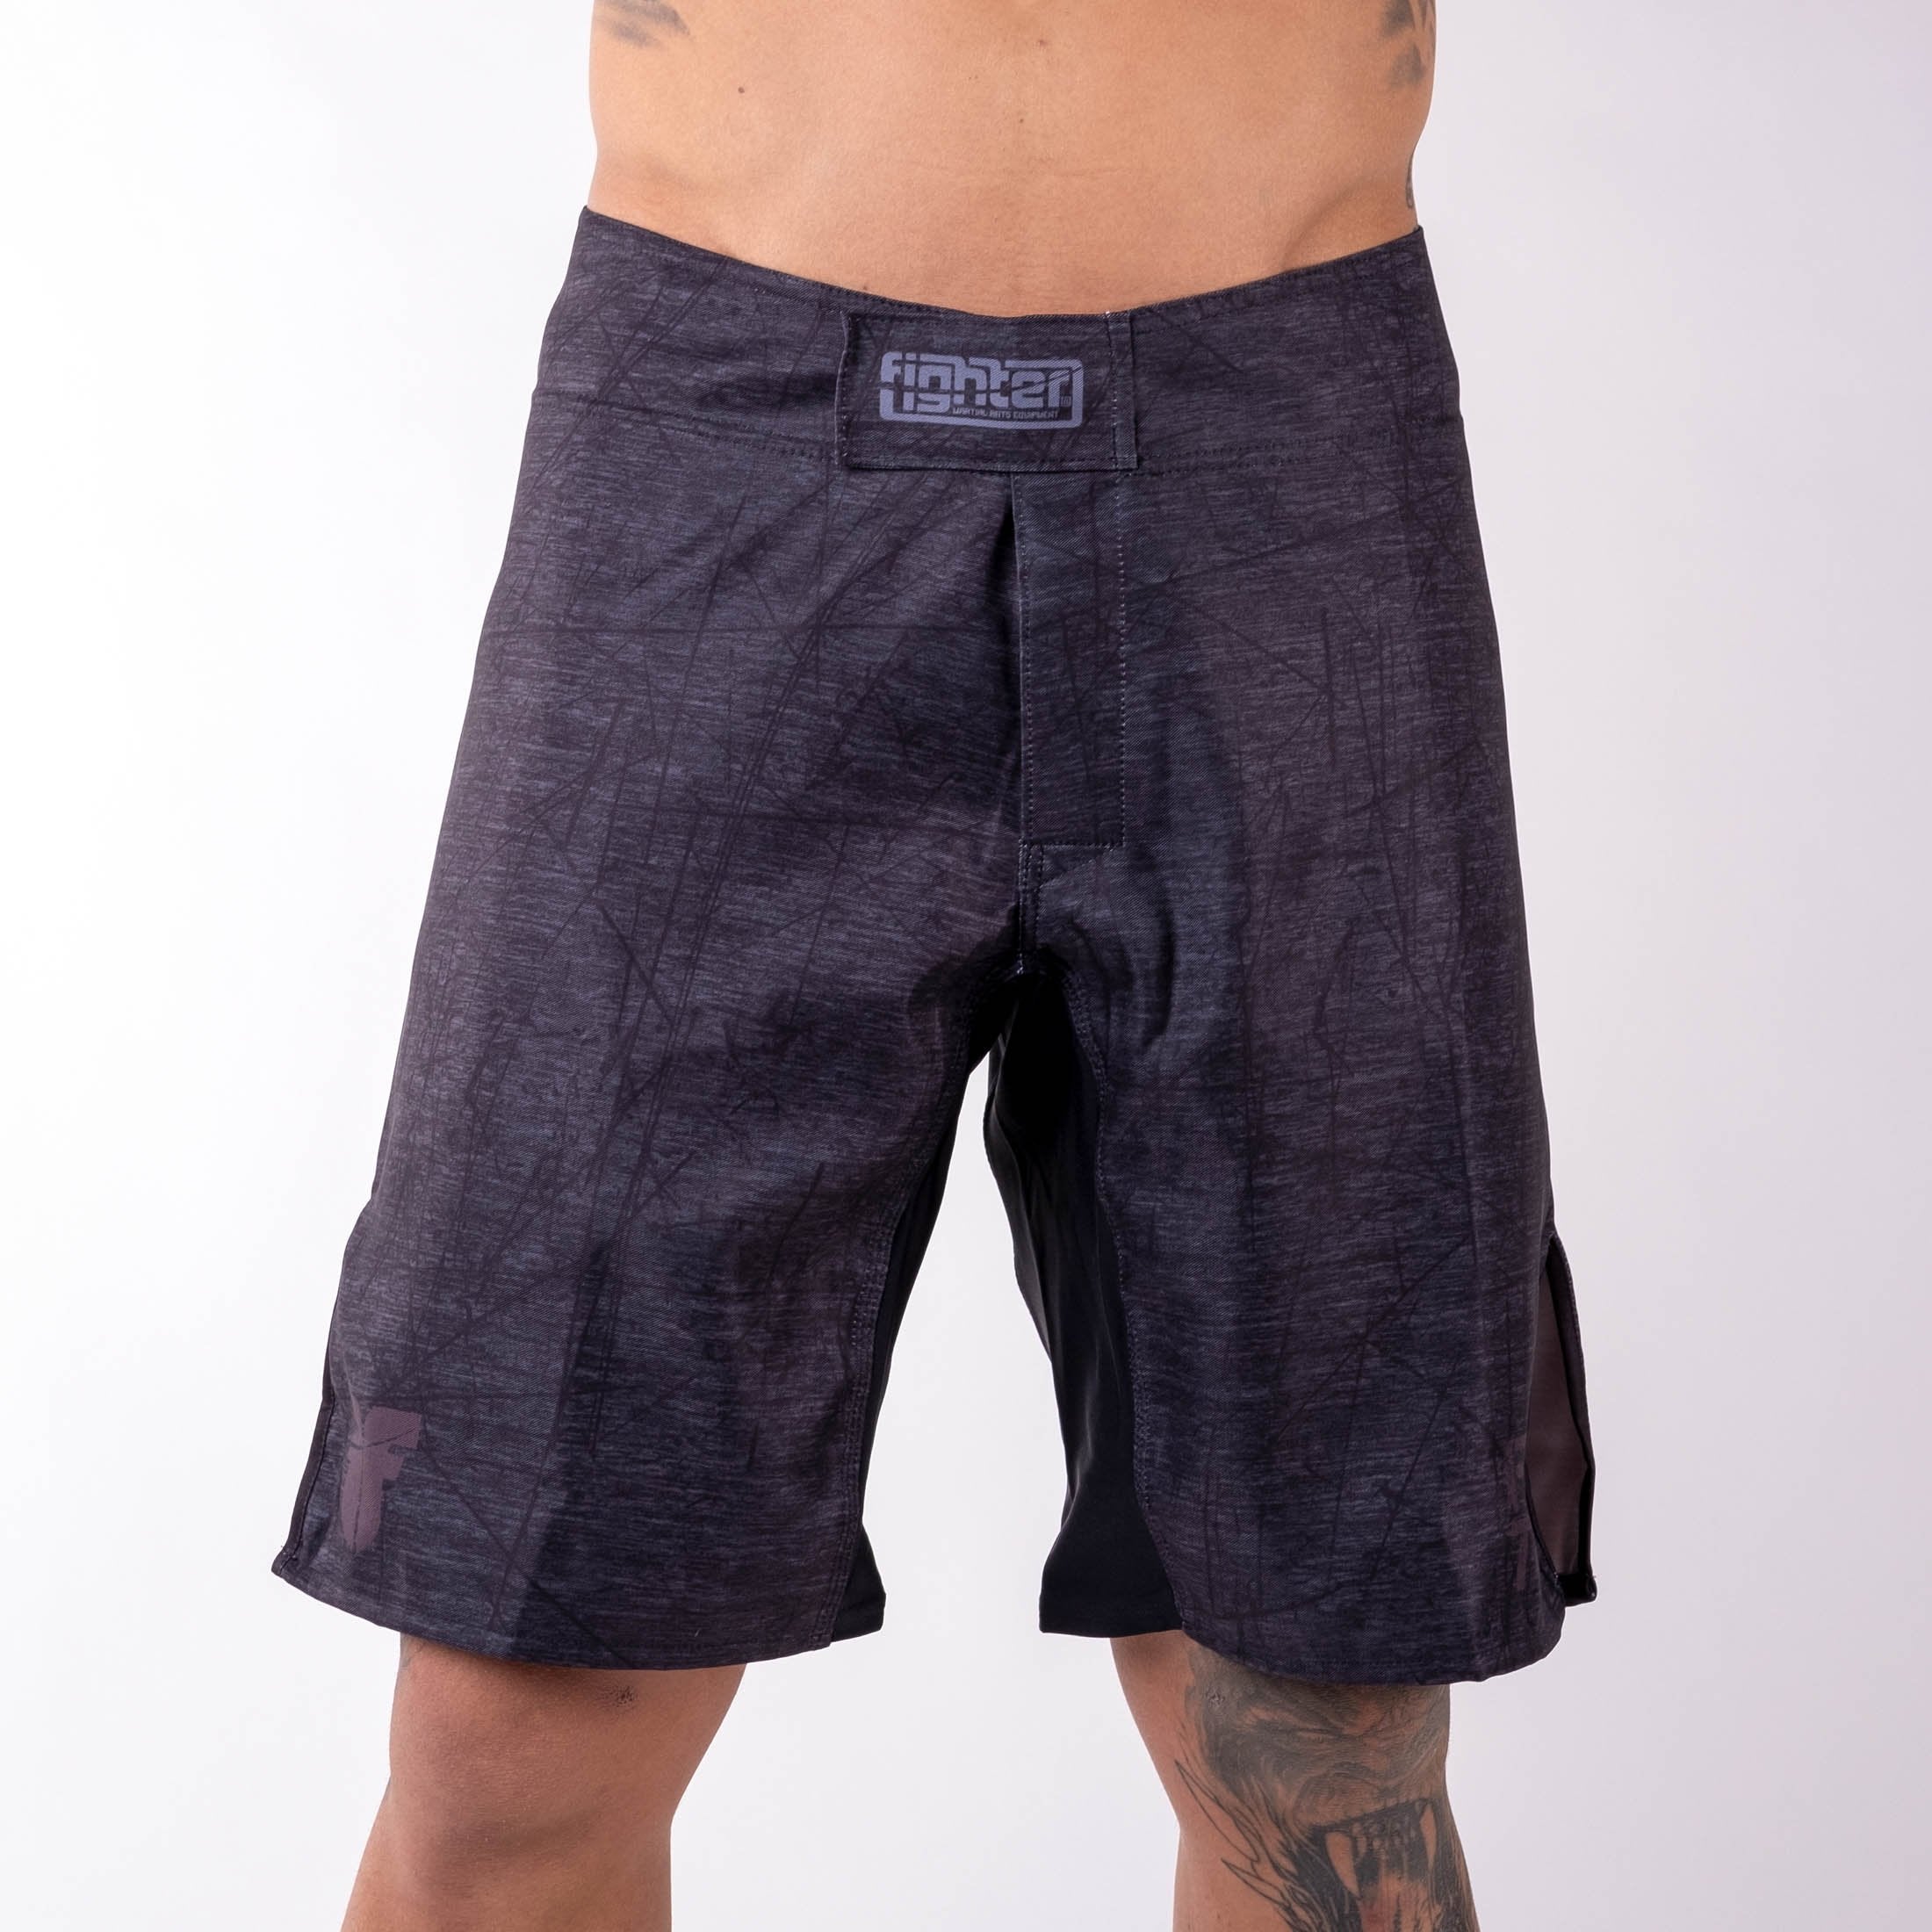 Fighter MMA Shorts - Life is a Fight - grau